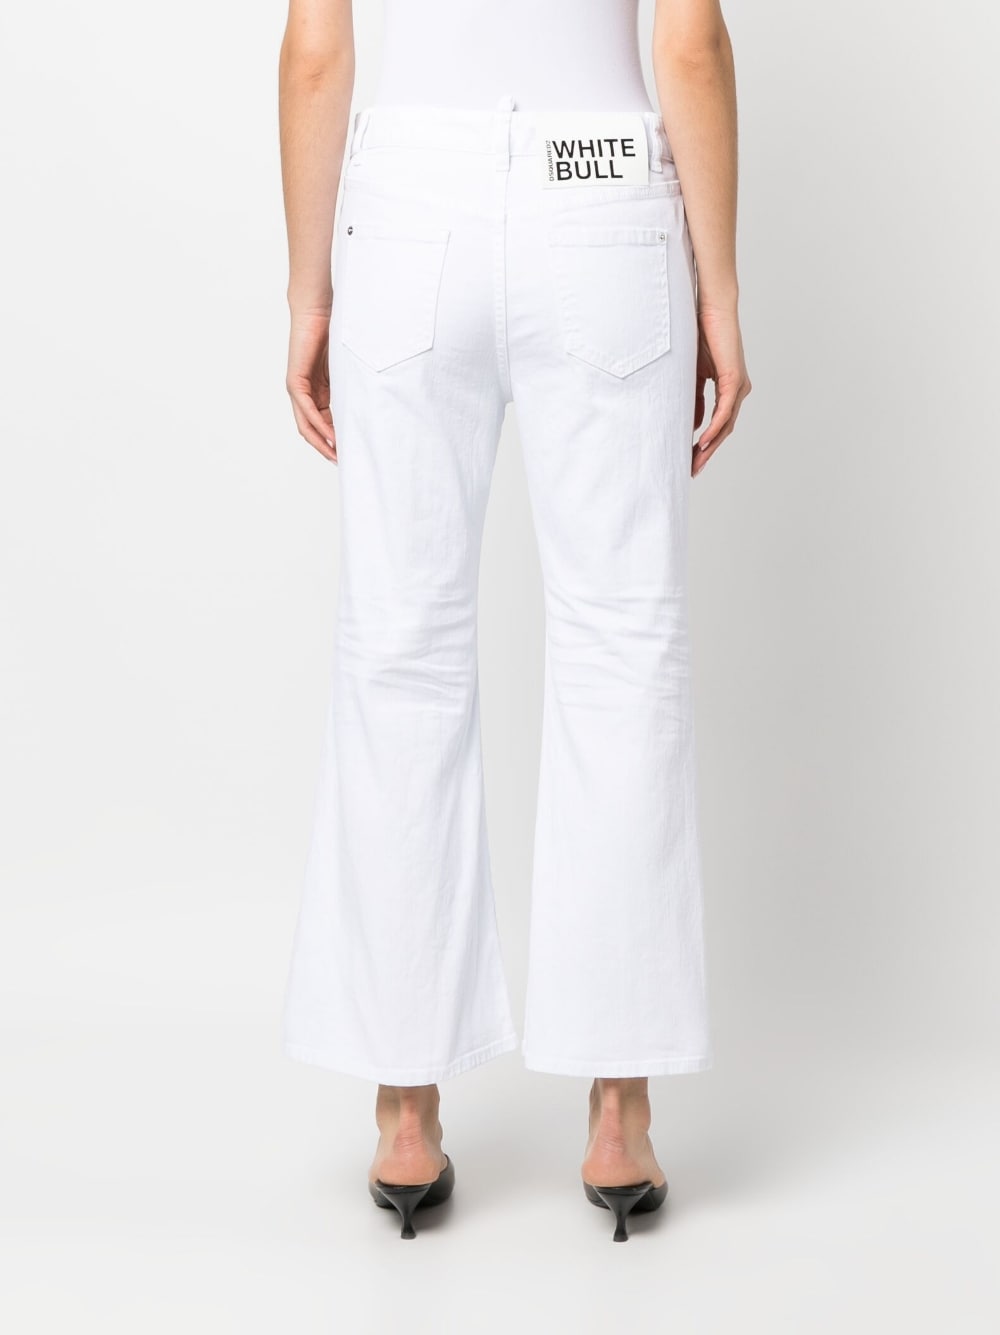 DSQUARED2 - White Bull cropped jeans